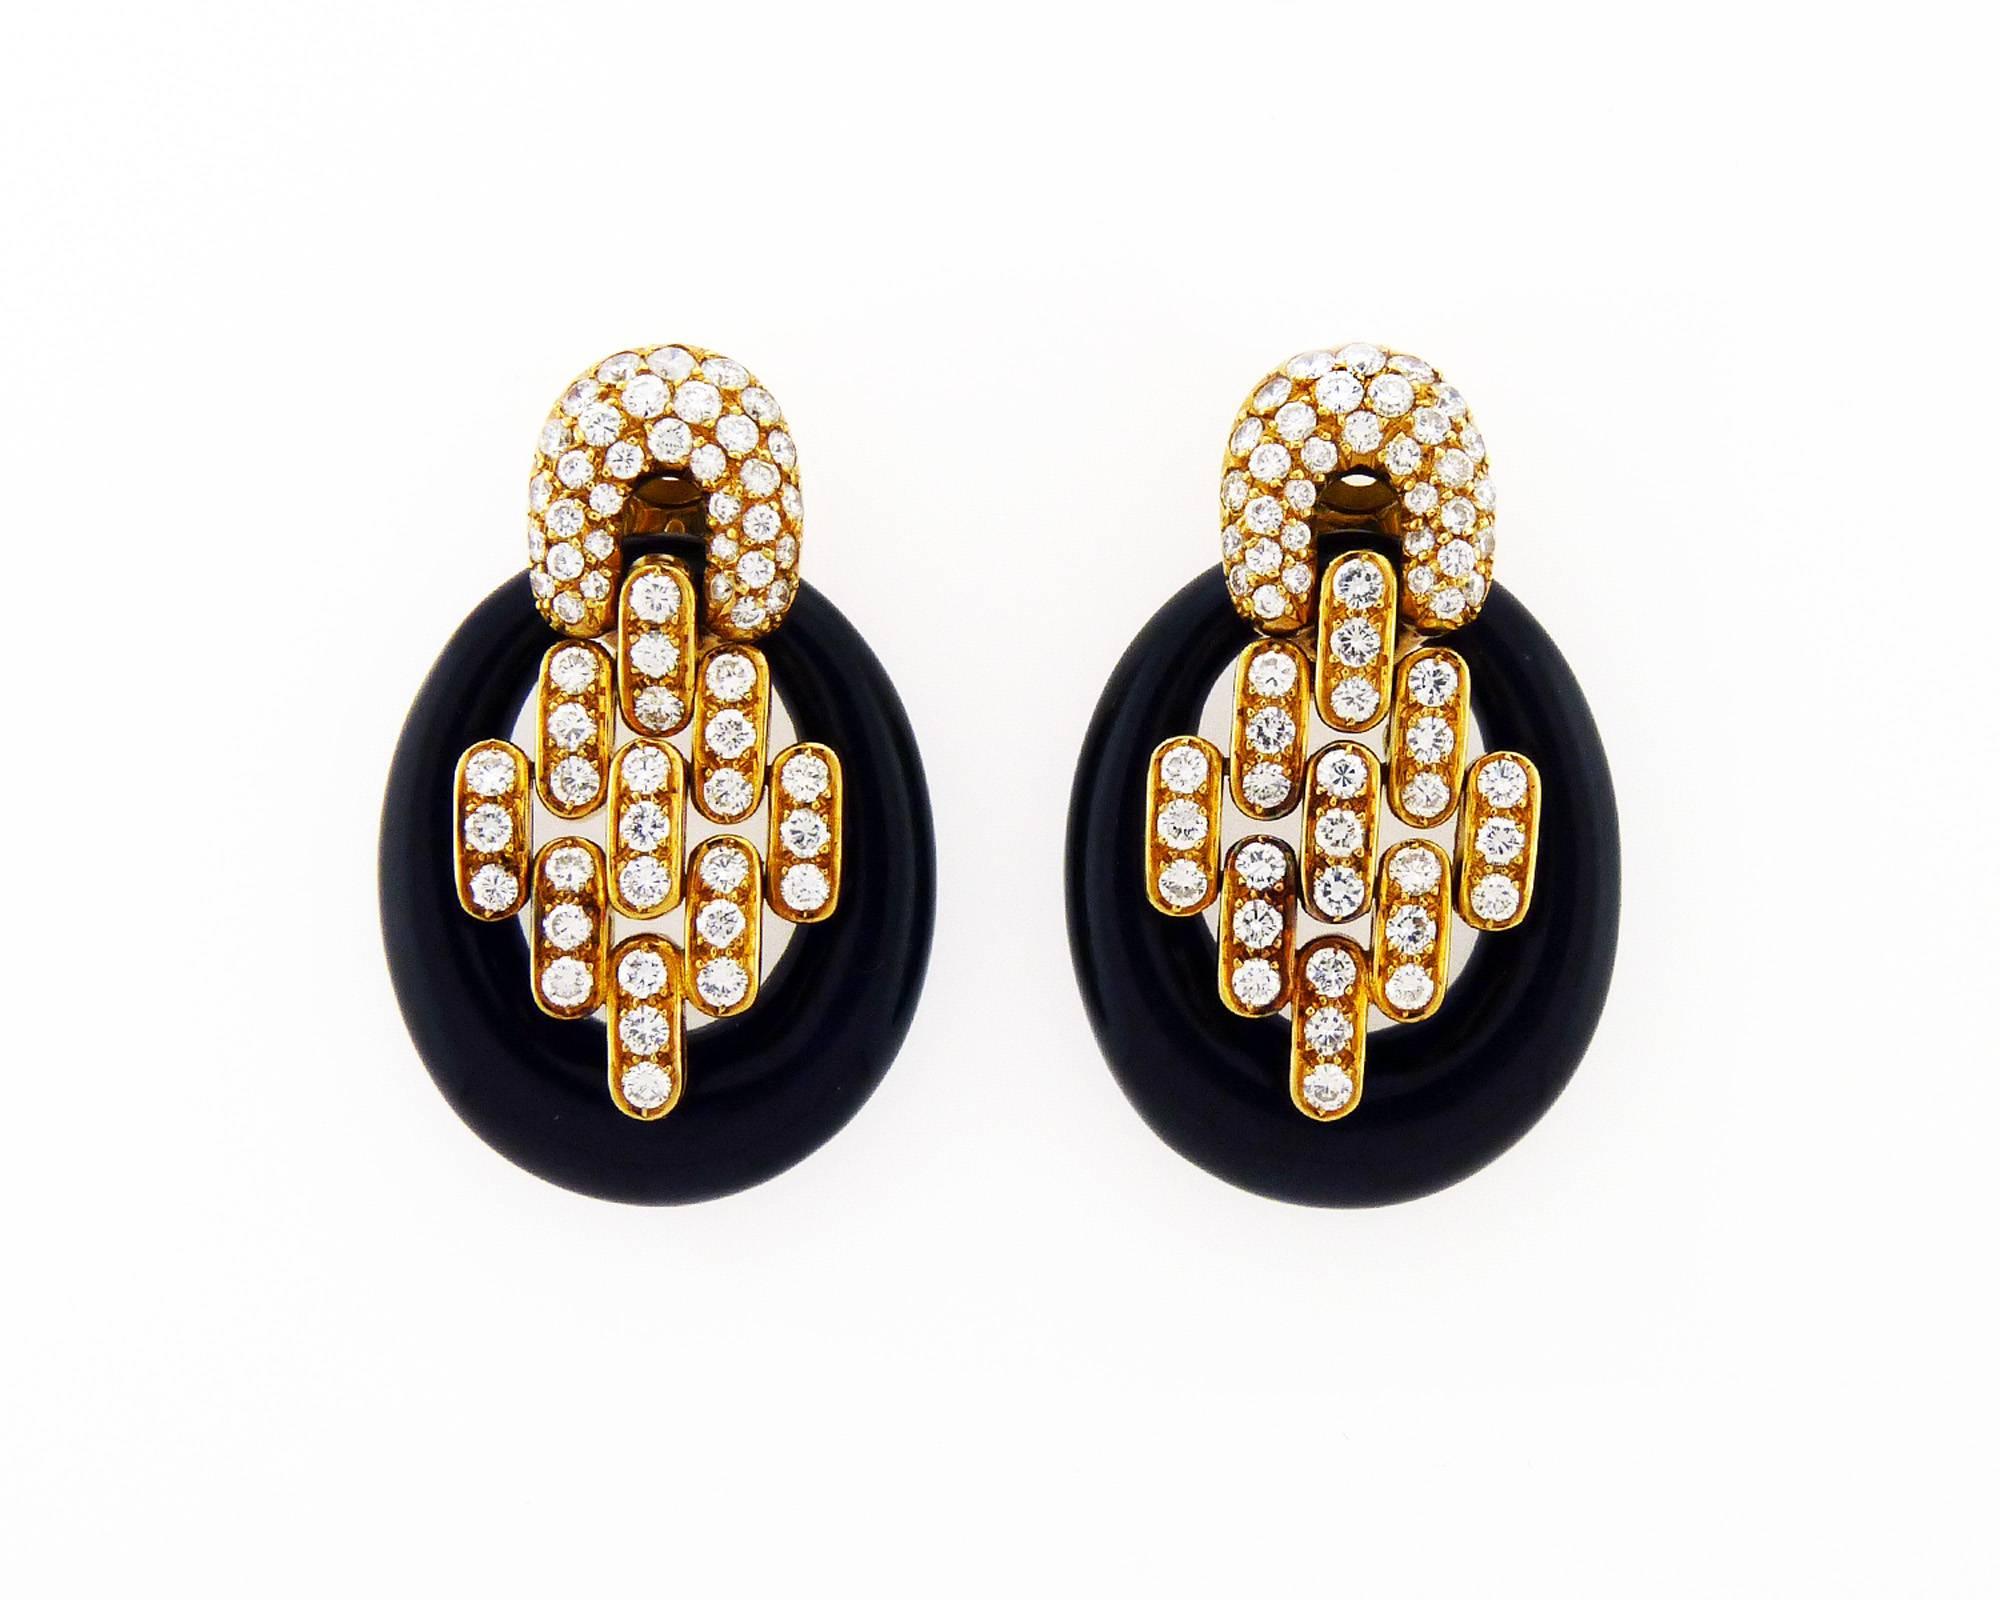 A pair of onyx and diamond earclips mounted in 18K yellow gold by Boucheron, France. This versatile earclips can be worn in two different ways: with or without the black onyx. The earrclips feel very comfortable on the ear.
Diamonds are